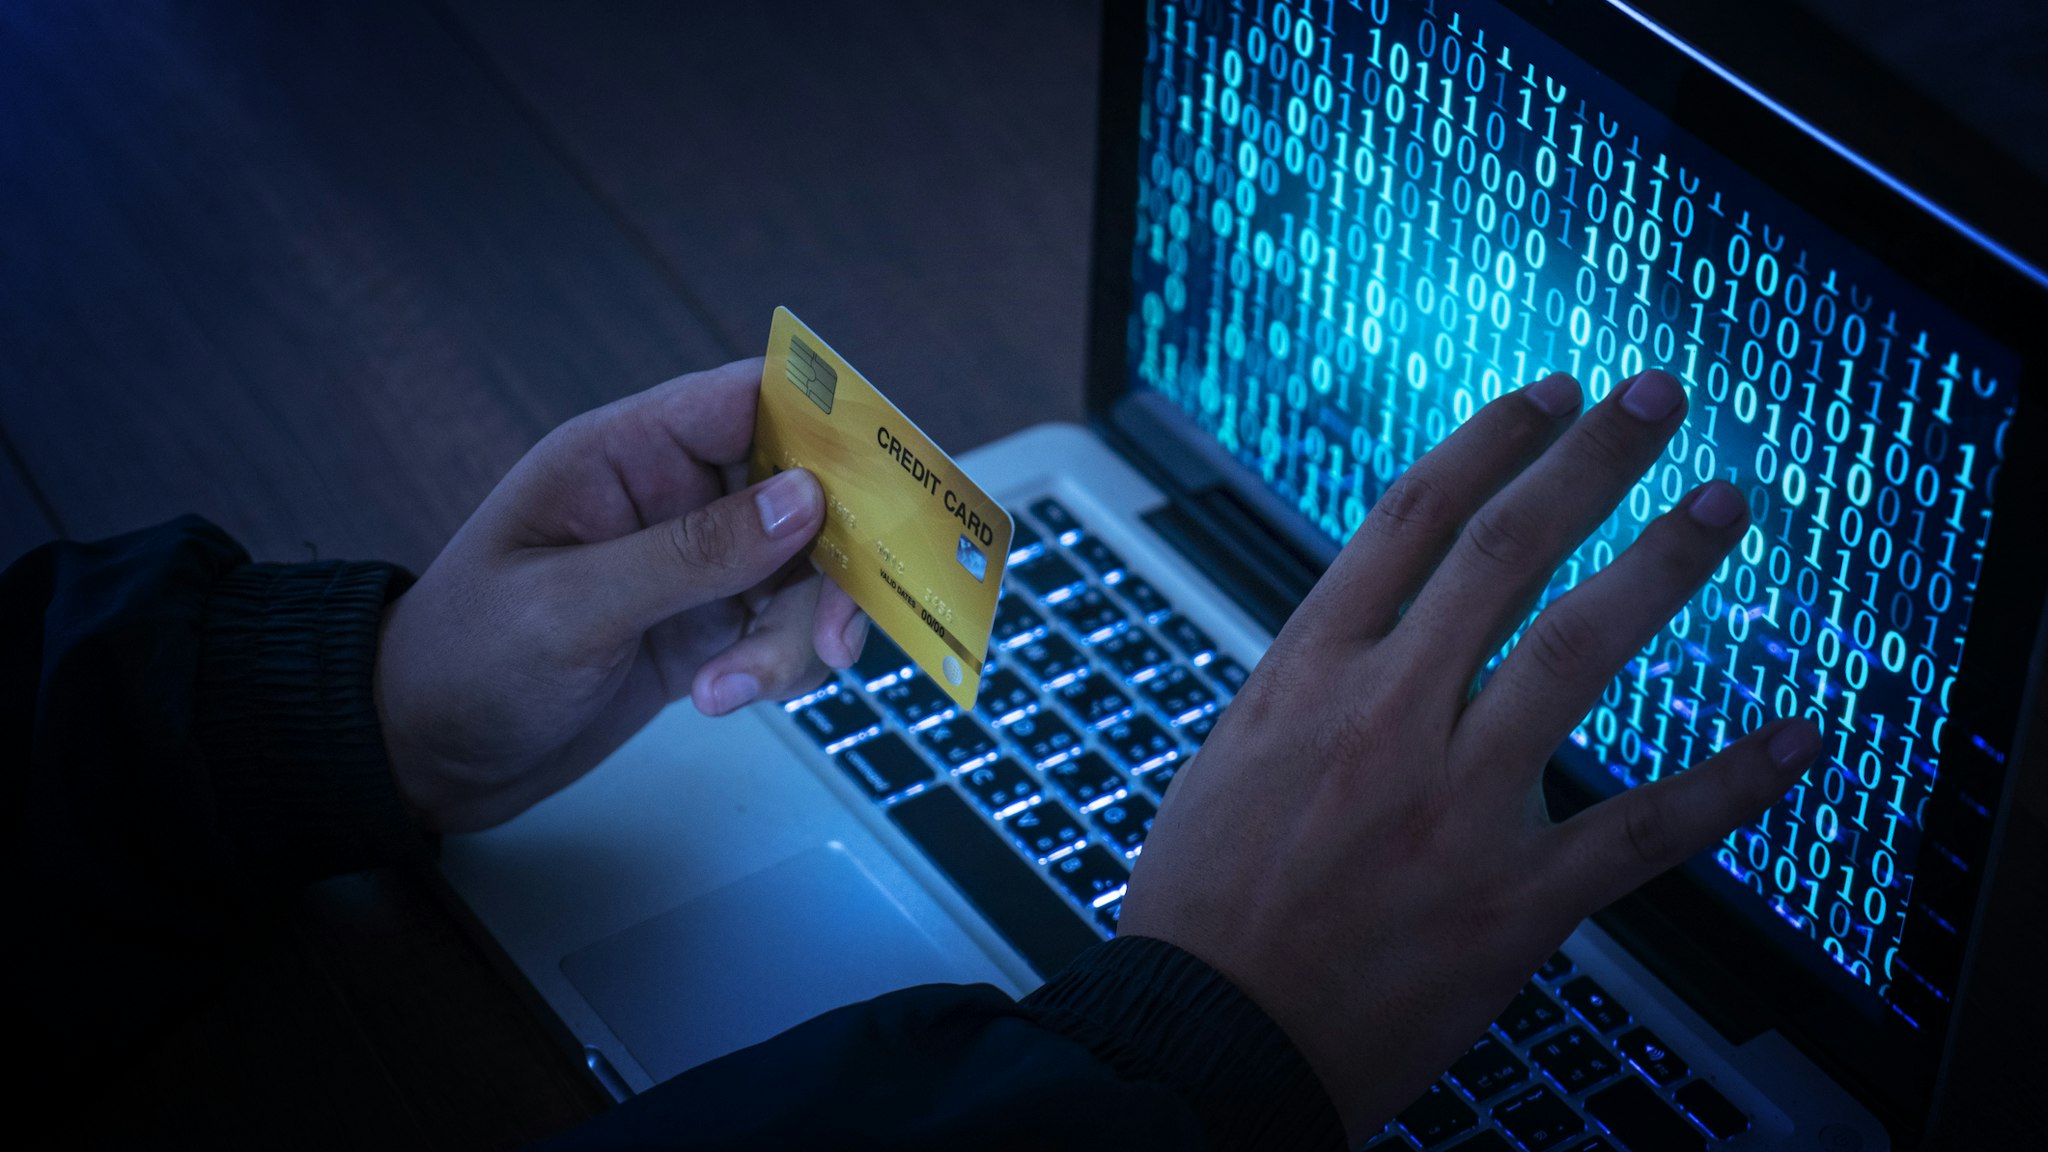 Hands of anonymous hackers holding credit card - stock photo